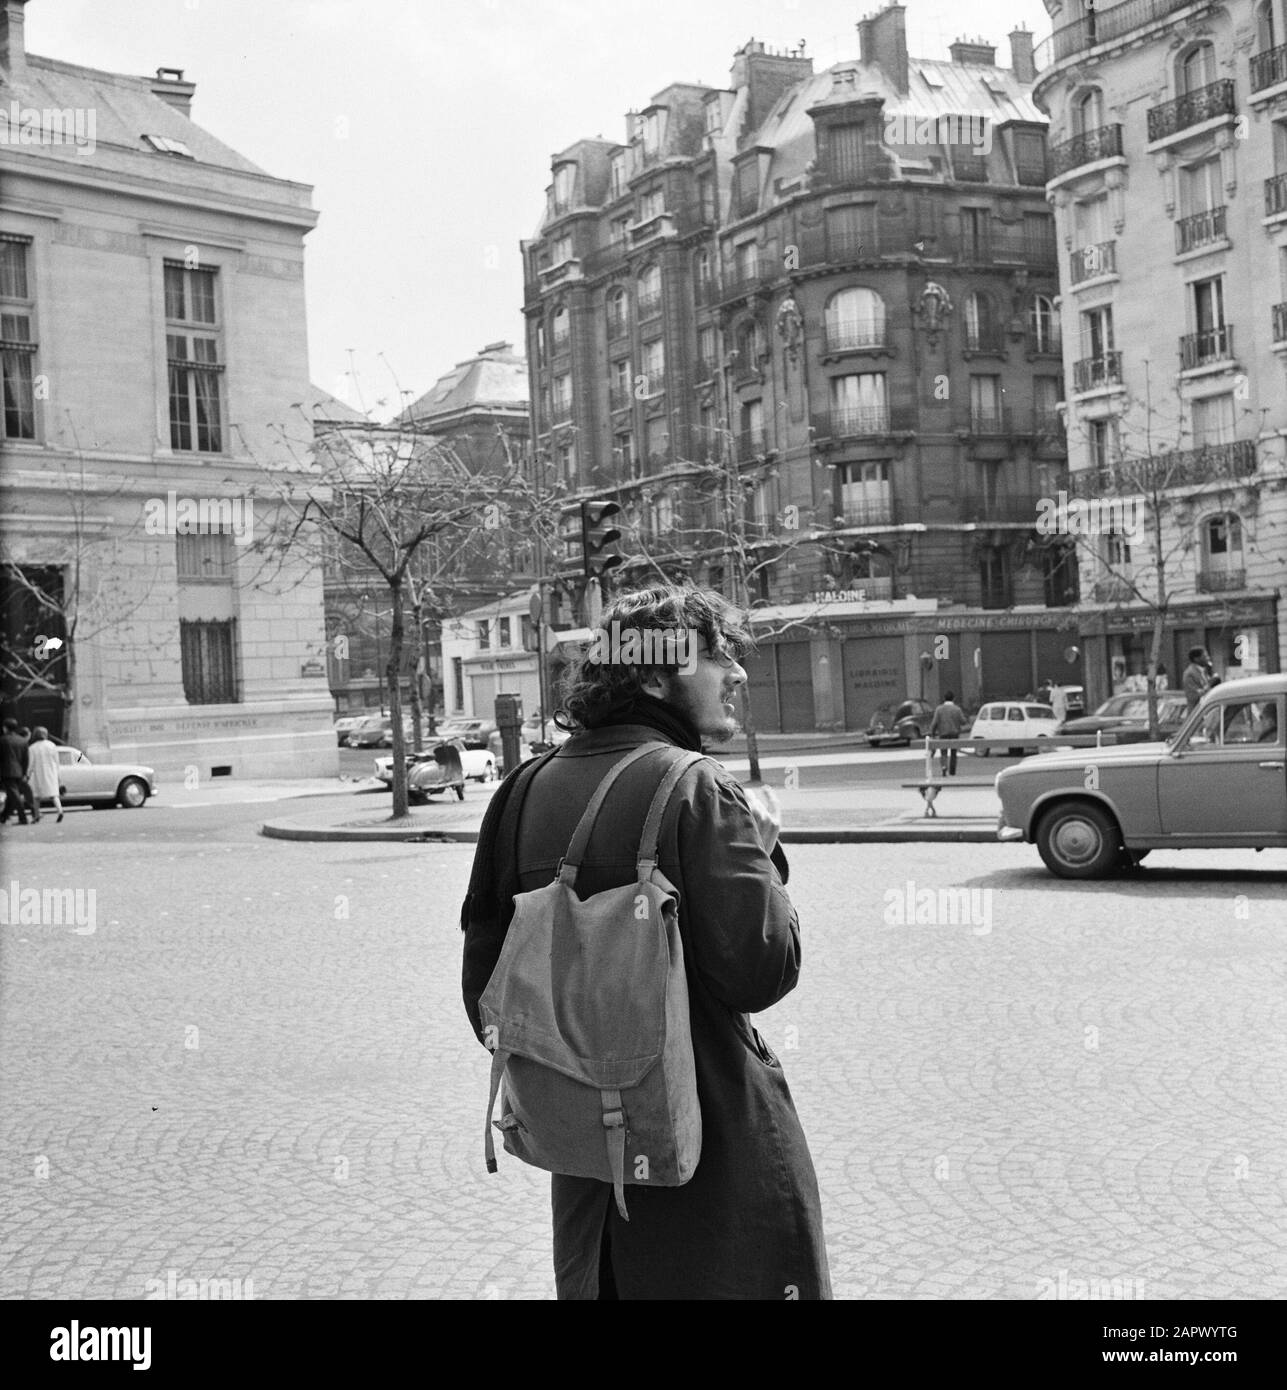 Pariser Bilder [The street life of Paris]  crossing 'beatnik' in Saint-Germain-des-Prés Annotation: District in the sixth and seventh arrondissement of Paris, traditionally populated by artists, students and intellectuals Date: 1965 Location: France, Paris Keywords: beatniks, street images, pedestrian Stock Photo